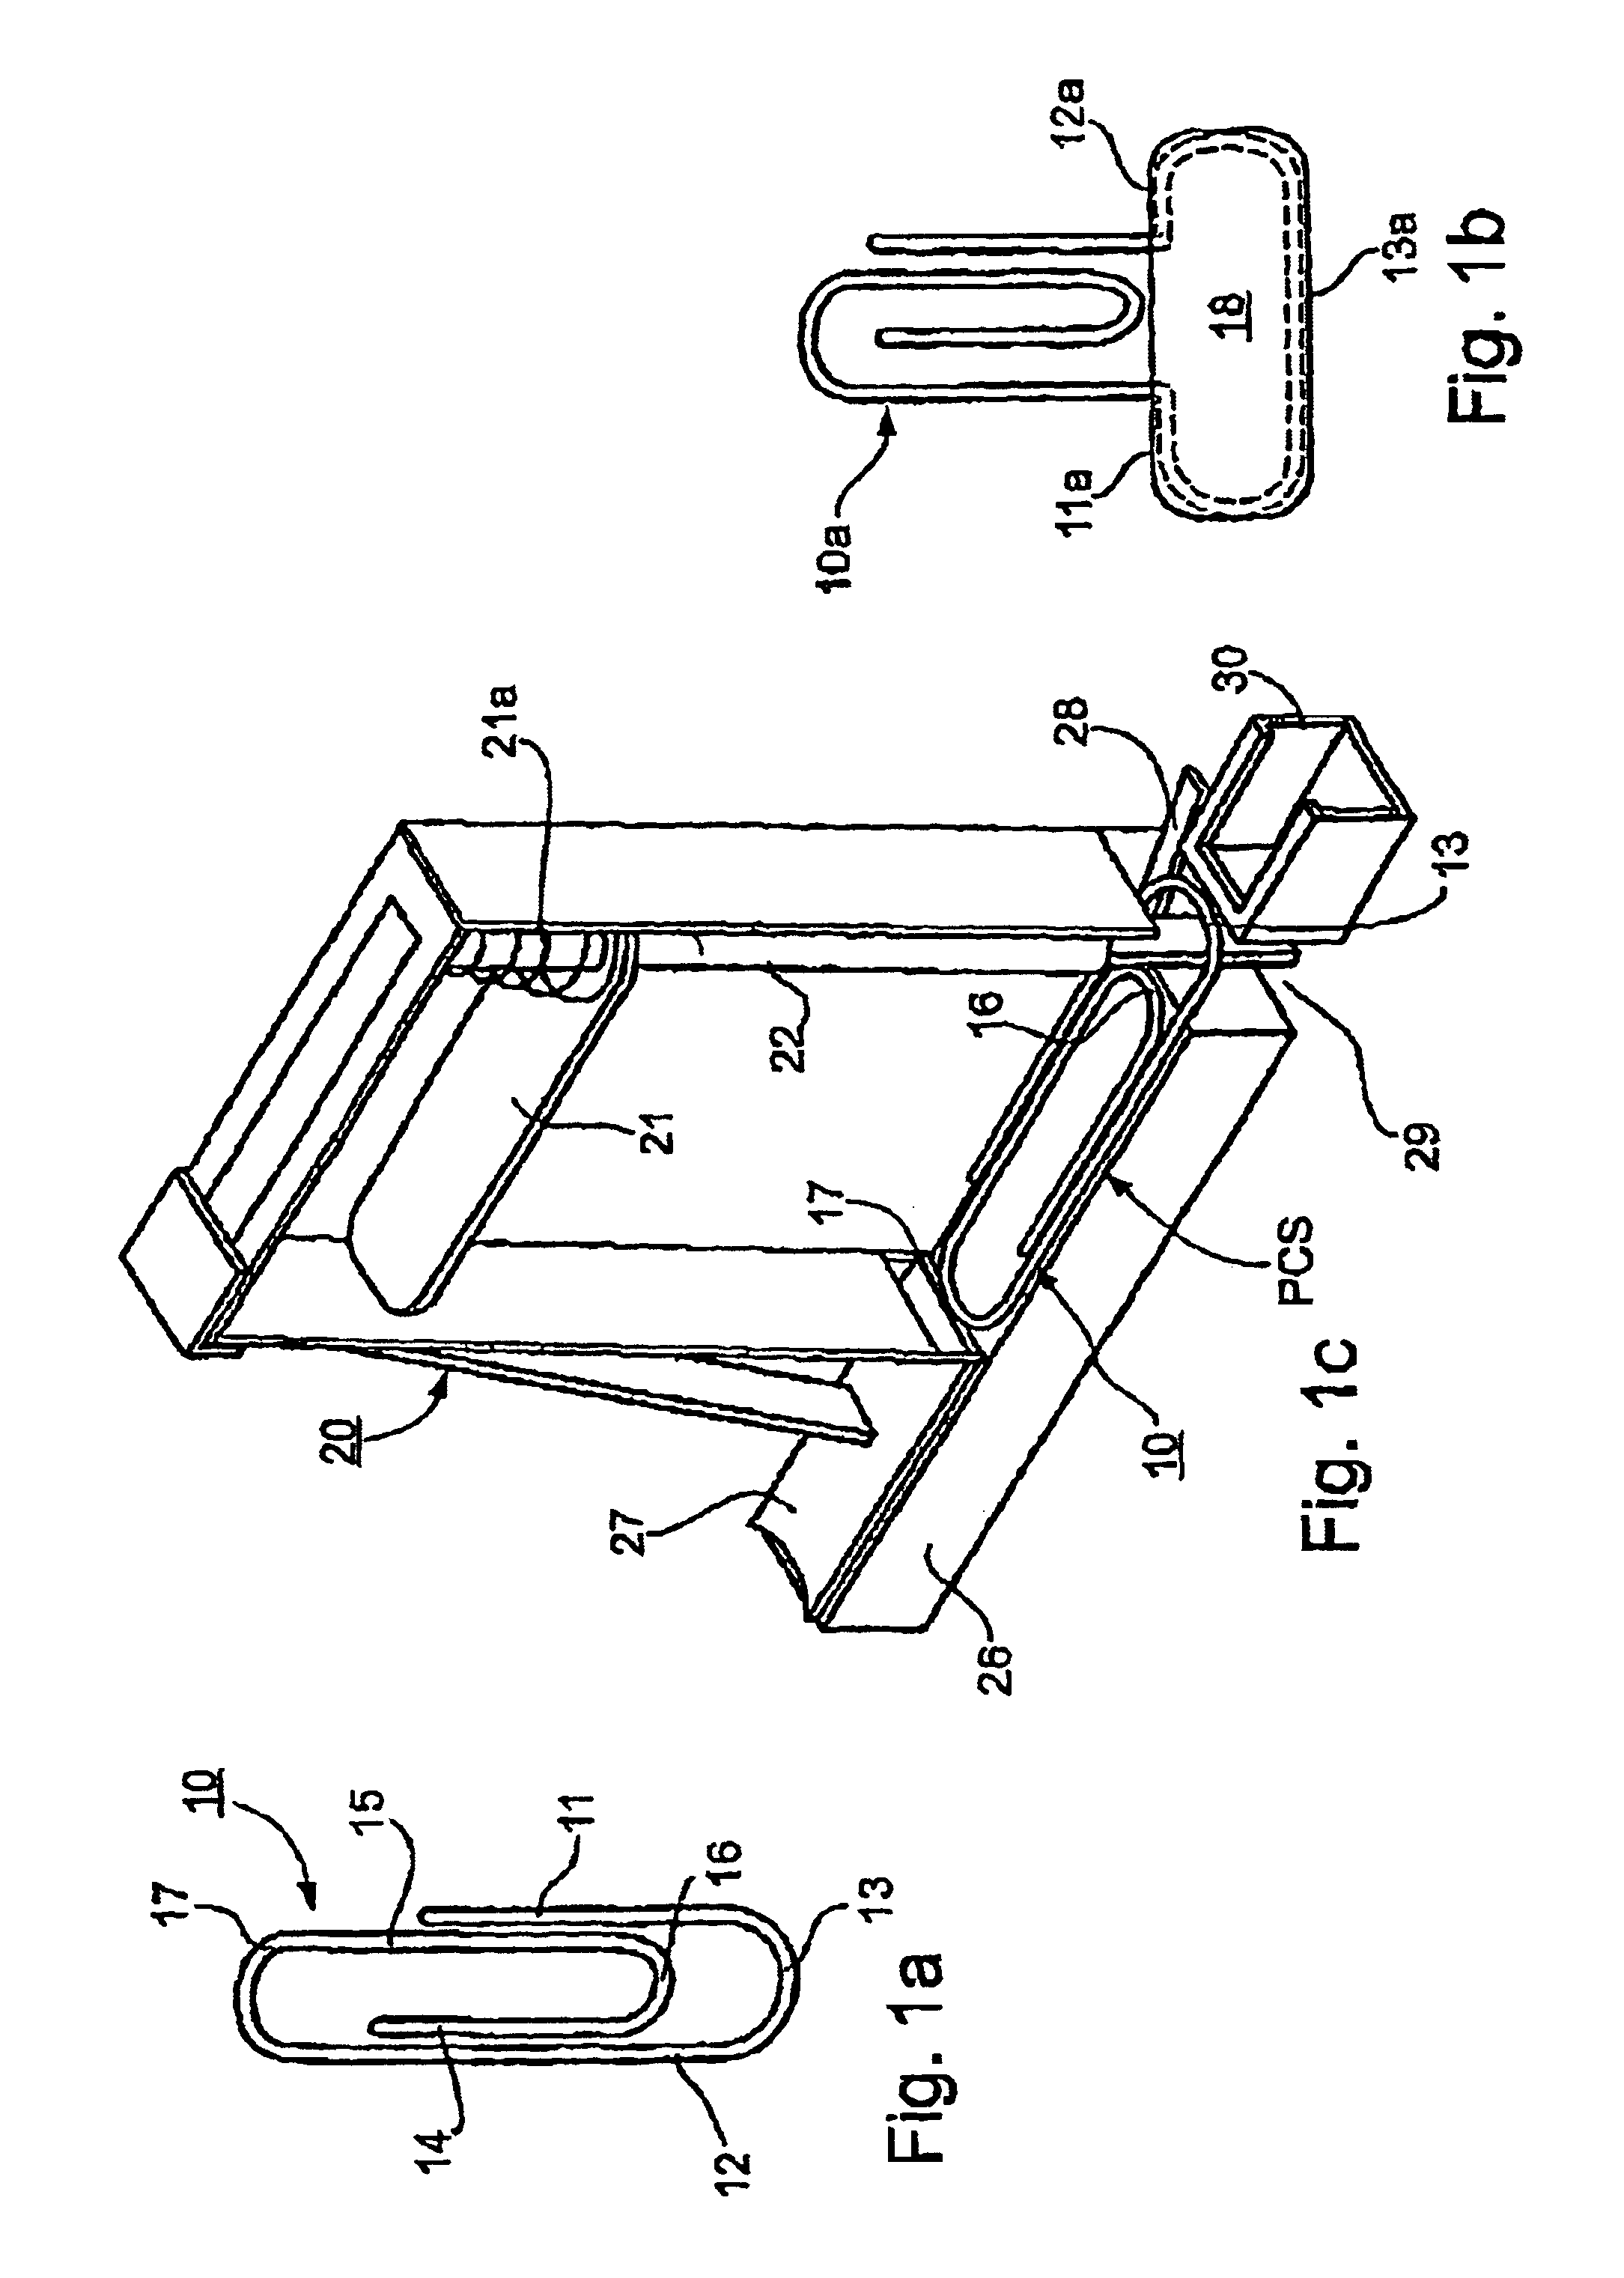 Spring-wire clip applicator and method, and spring wire clips useful therewith